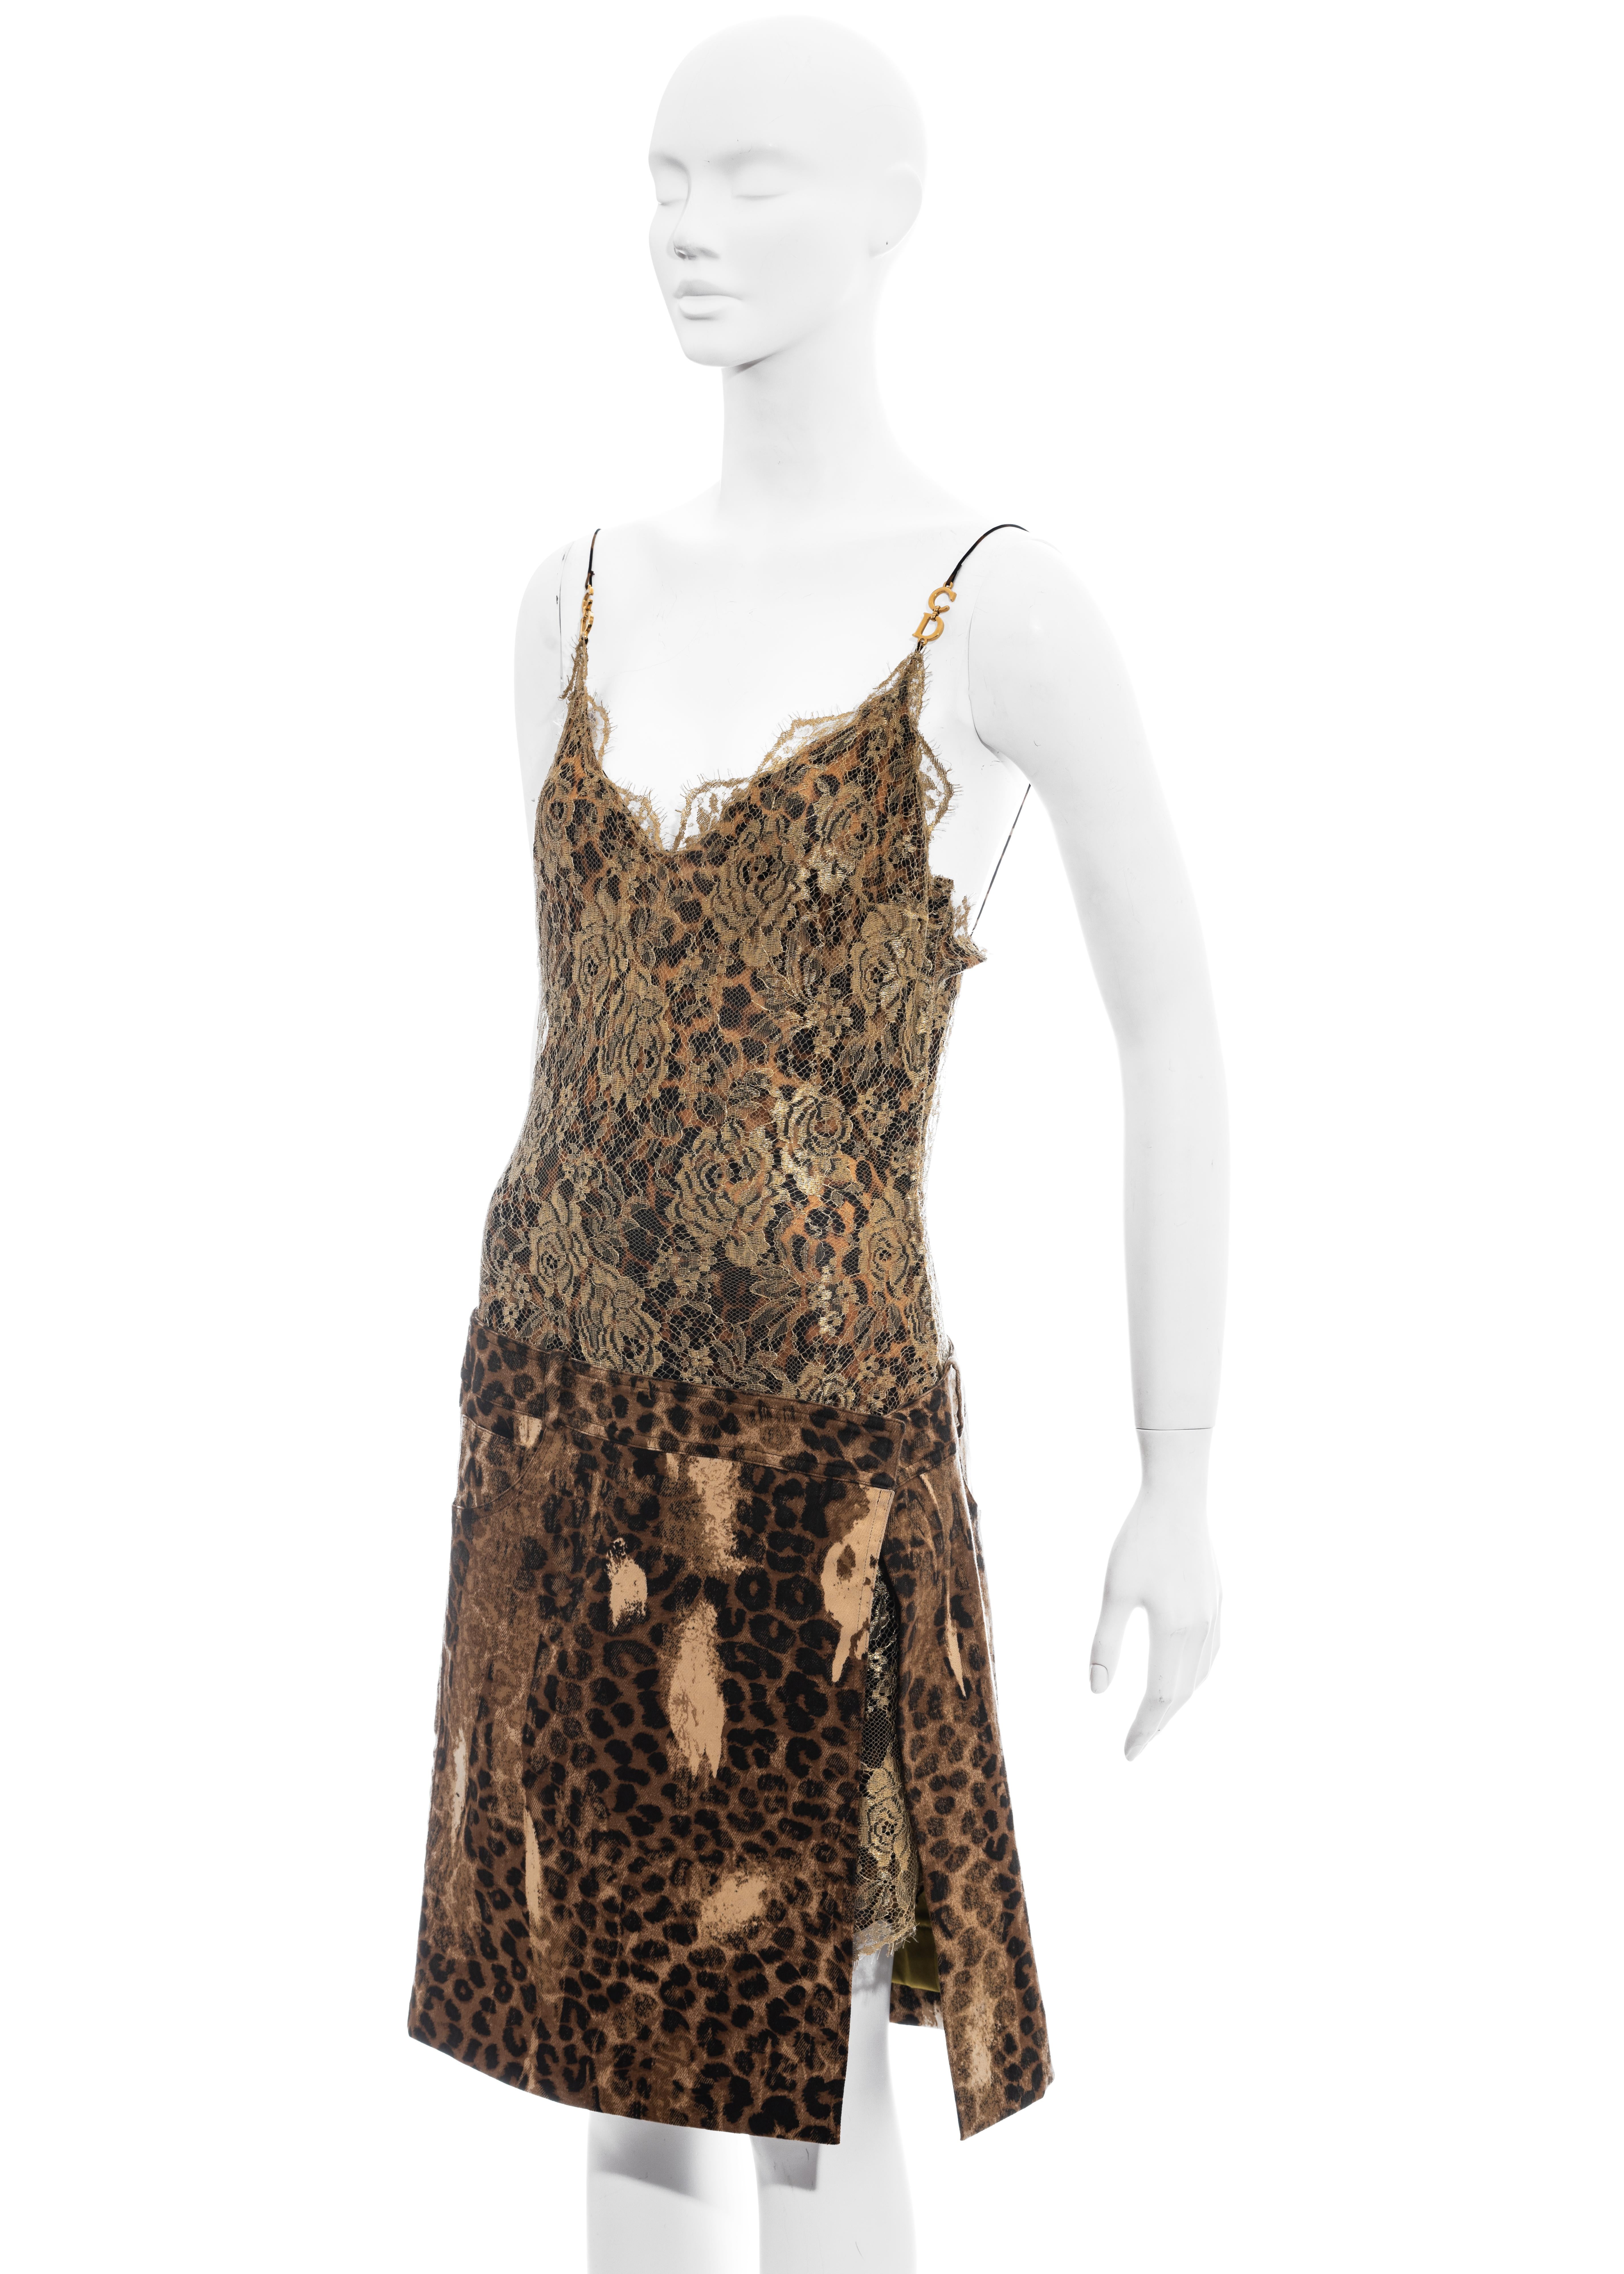 ▪ Christian Dior by John Galliano gold lace evening dress
▪ Gold lace: 45% Polyester, 40% Viscose, 15% Nylon
▪ Leopard print skirt: 98% Cotton, 2% Lycra
▪ Leopard print lining: 100% Silk
▪ Snap button closures 
▪ Multiple pockets on skirt 
▪ FR 40 -